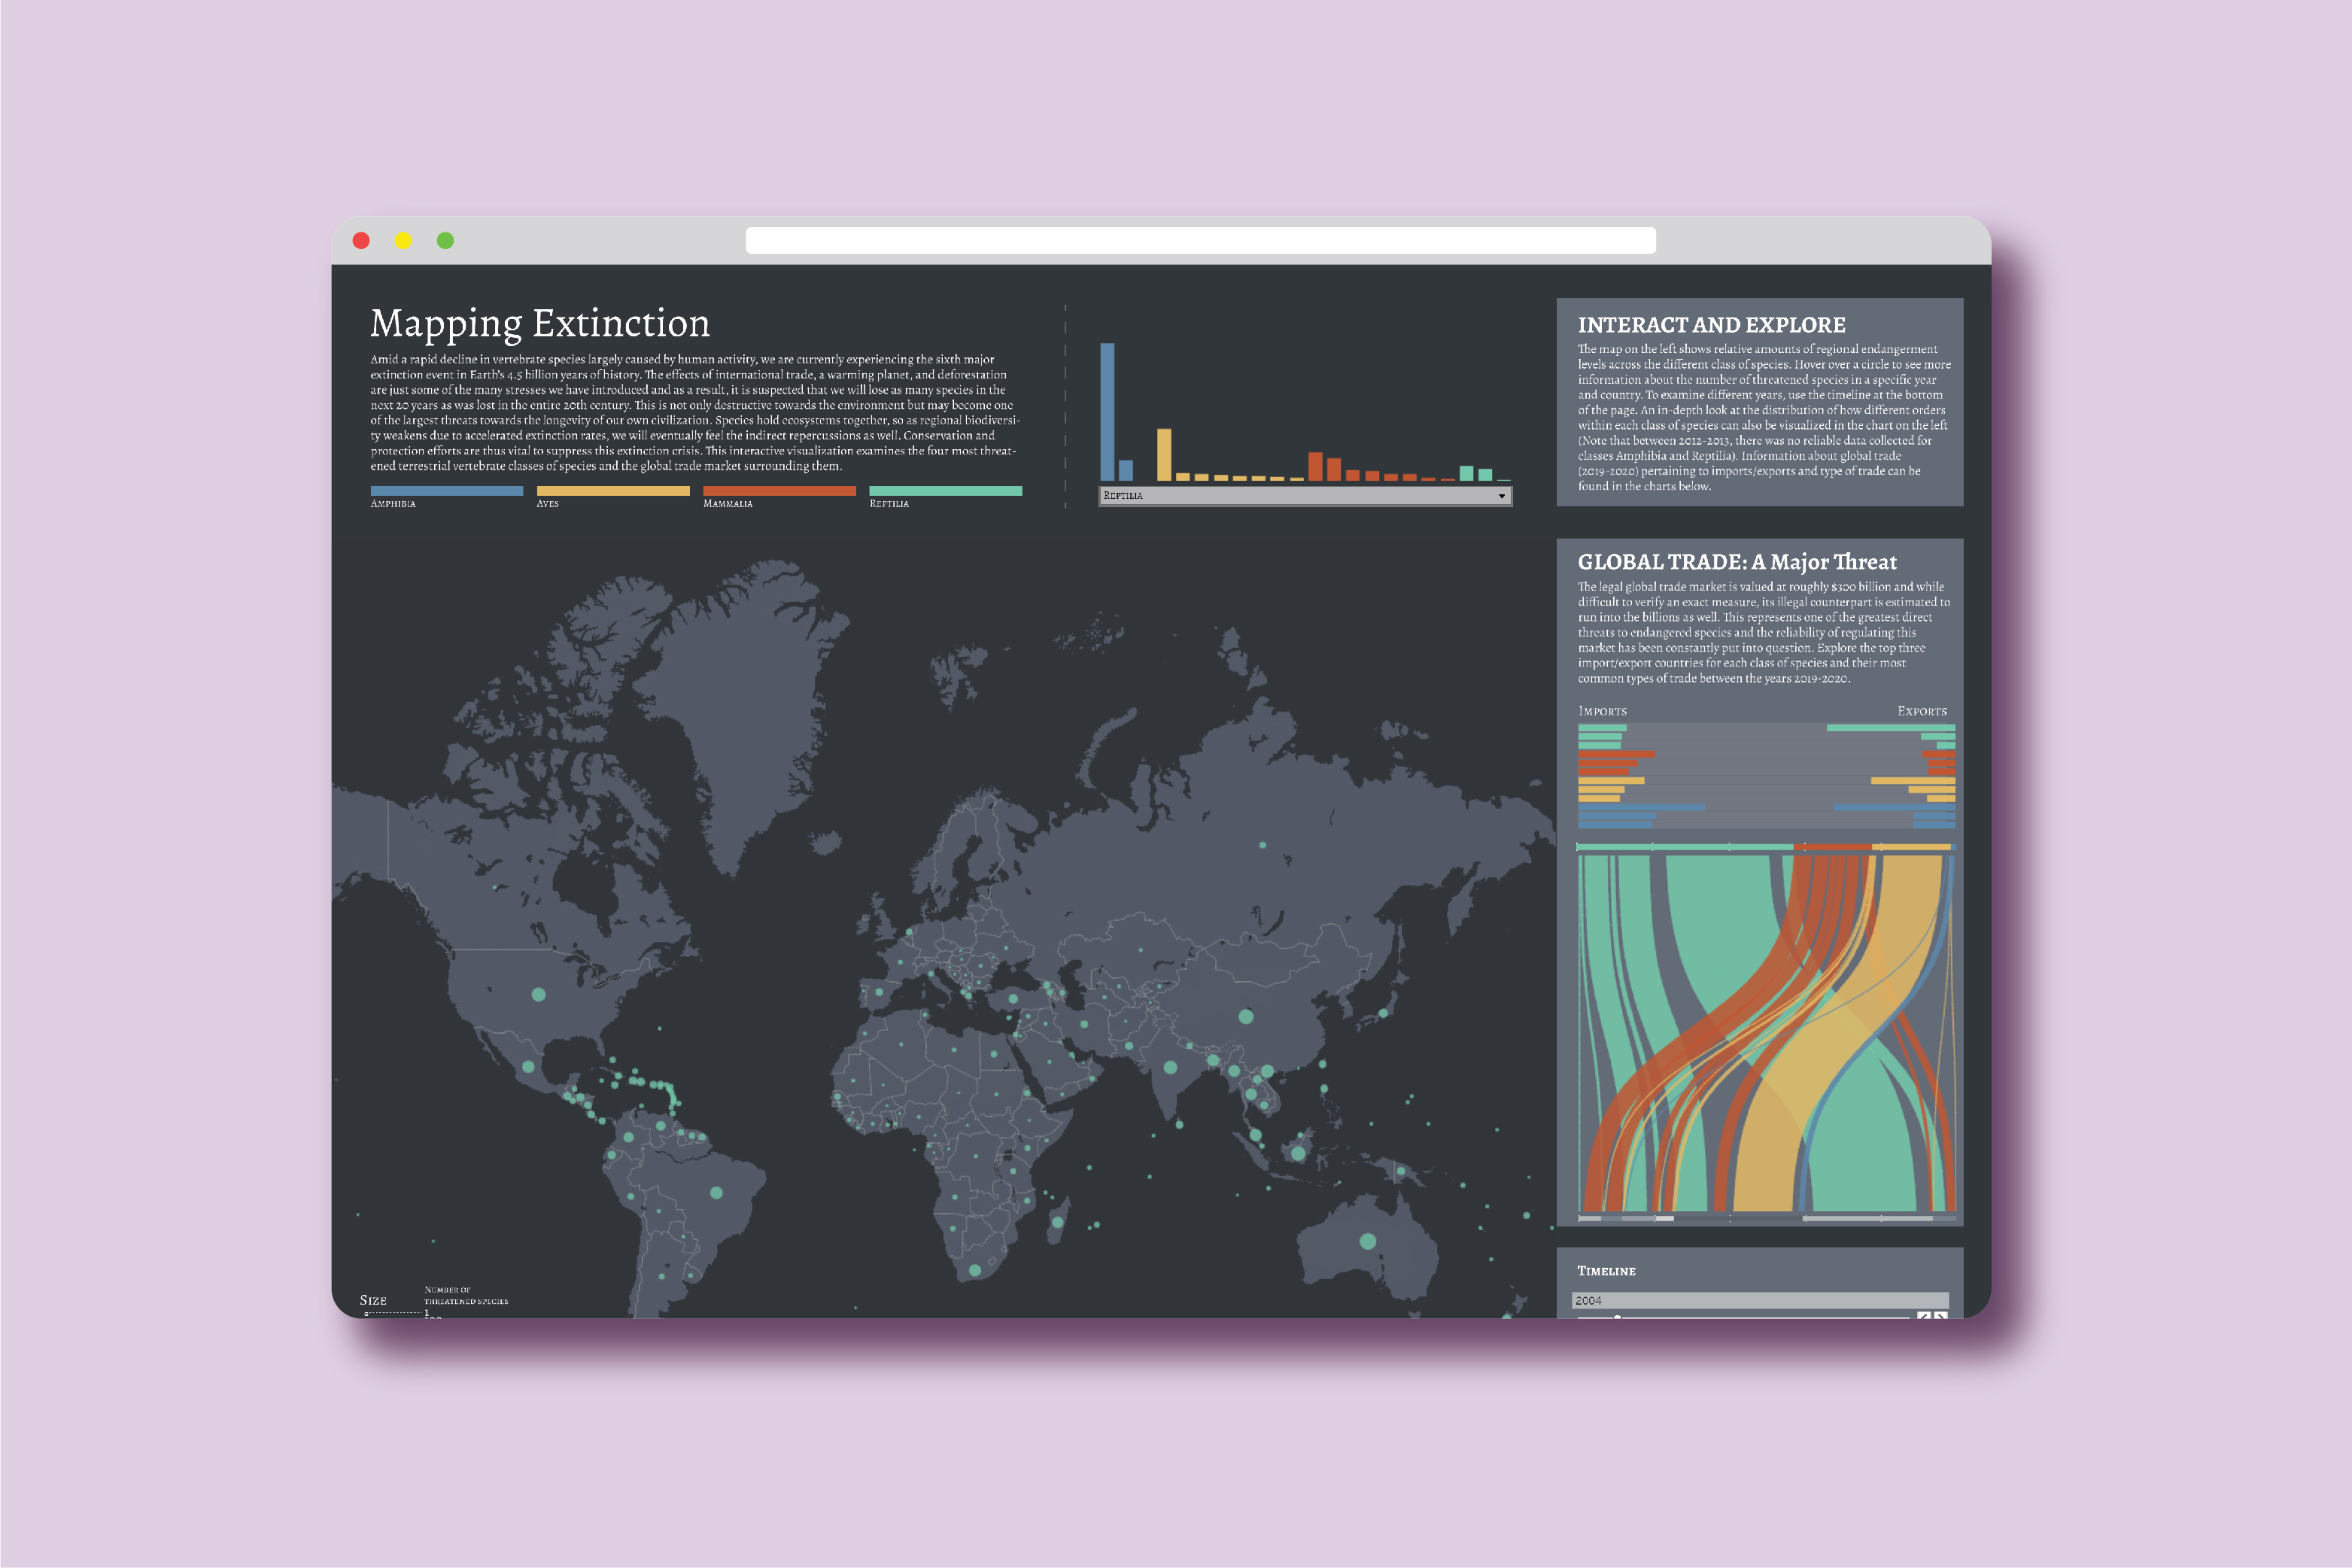 Banner image of the Mapping Extinction Tableau data visualization